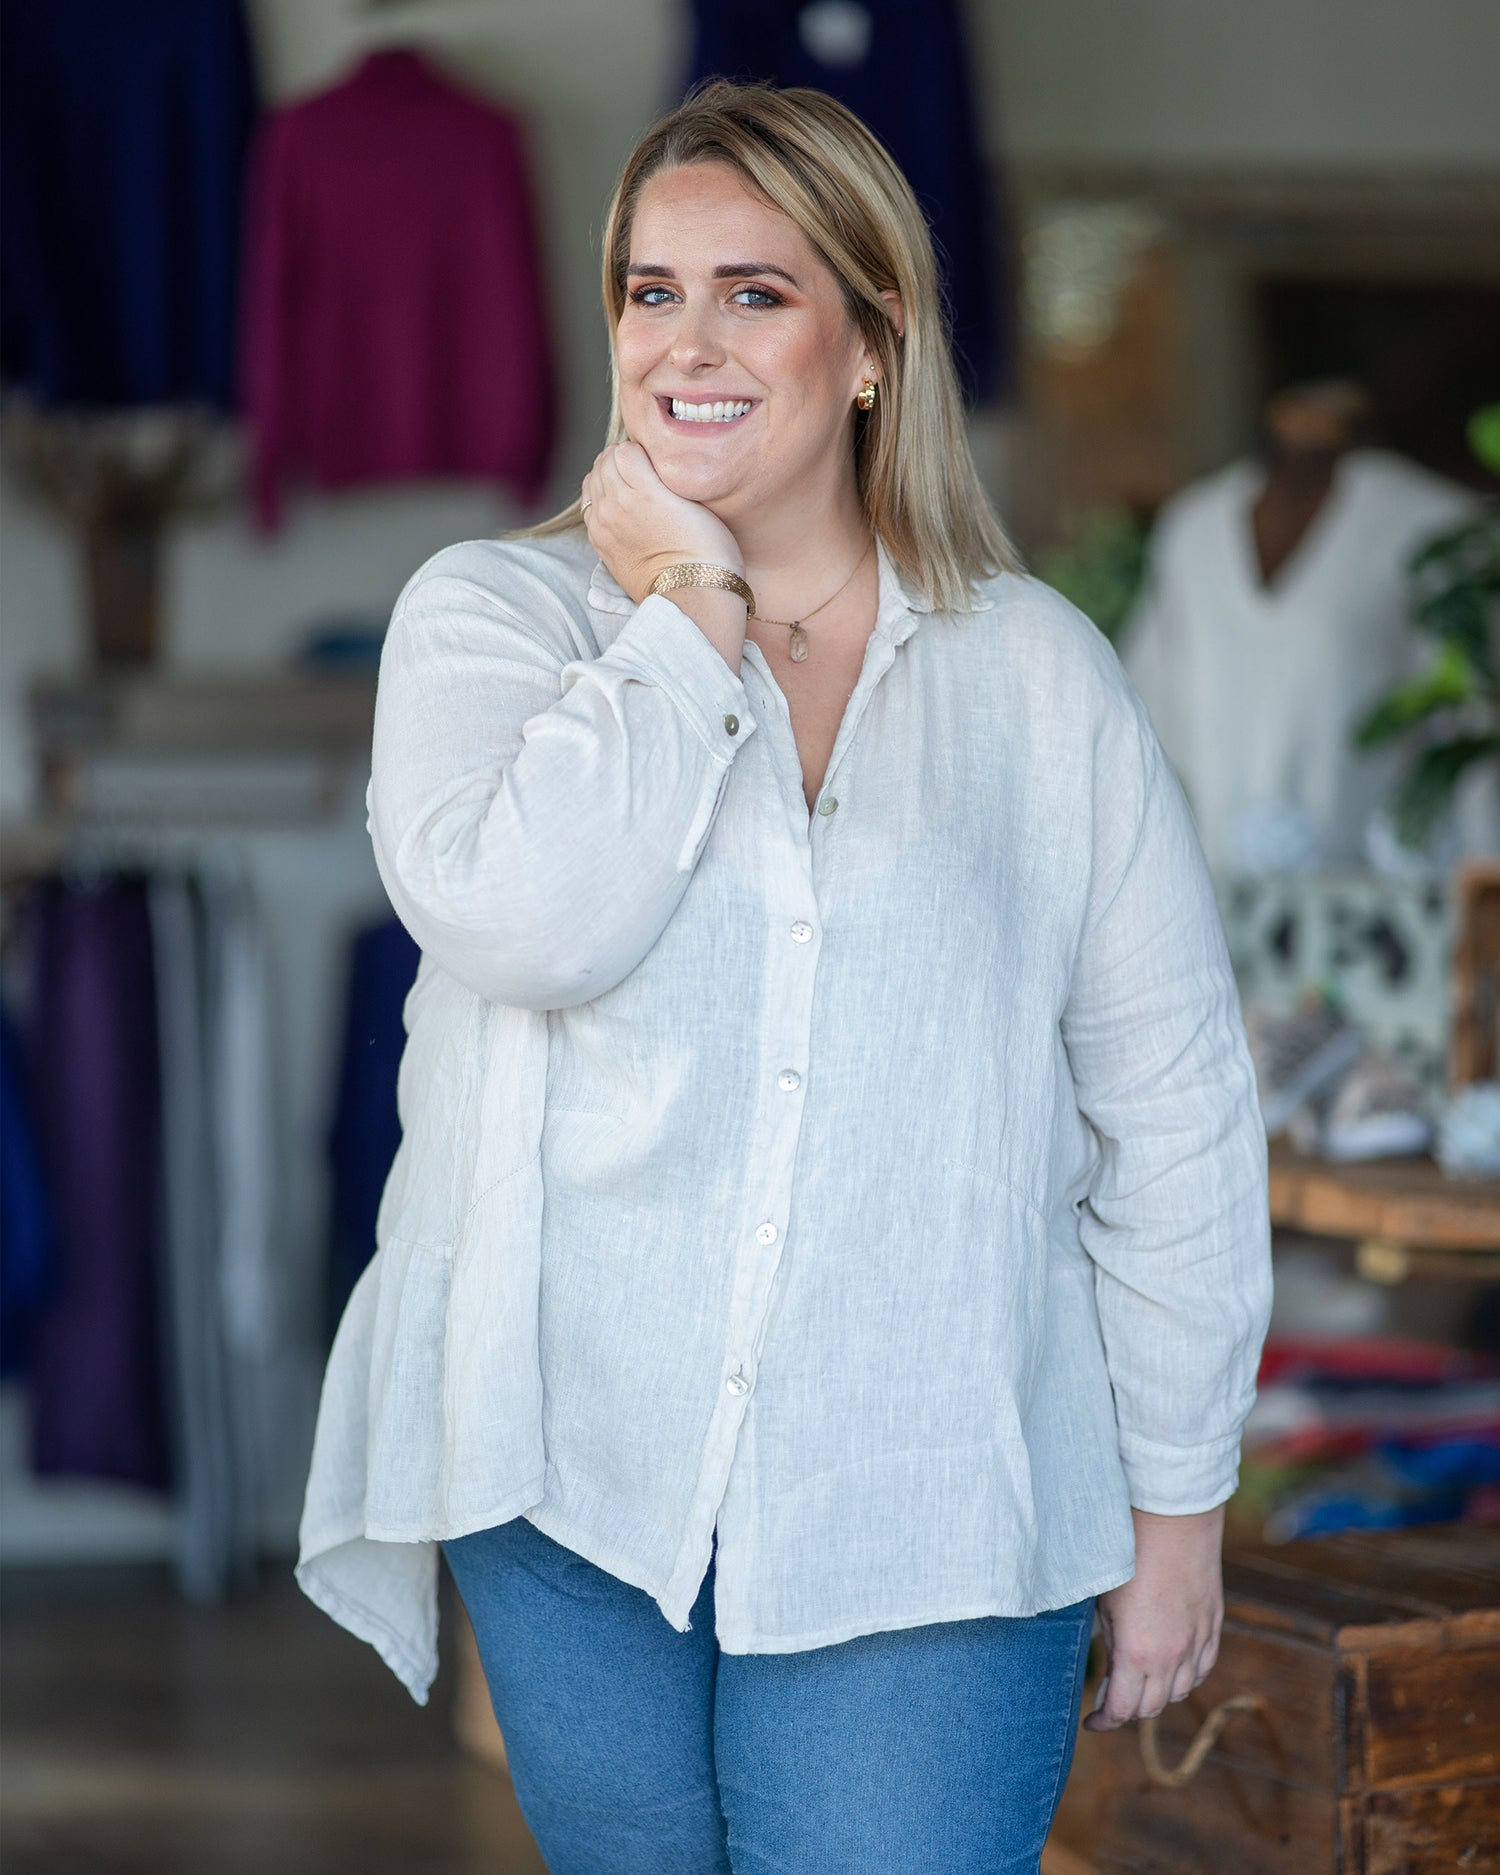 Collection: For The Love Of Linen ❤️ Crisp yet soft, a captivating combination you will fall in love with too. This top is very versatile with button down detail and a very flattering cut